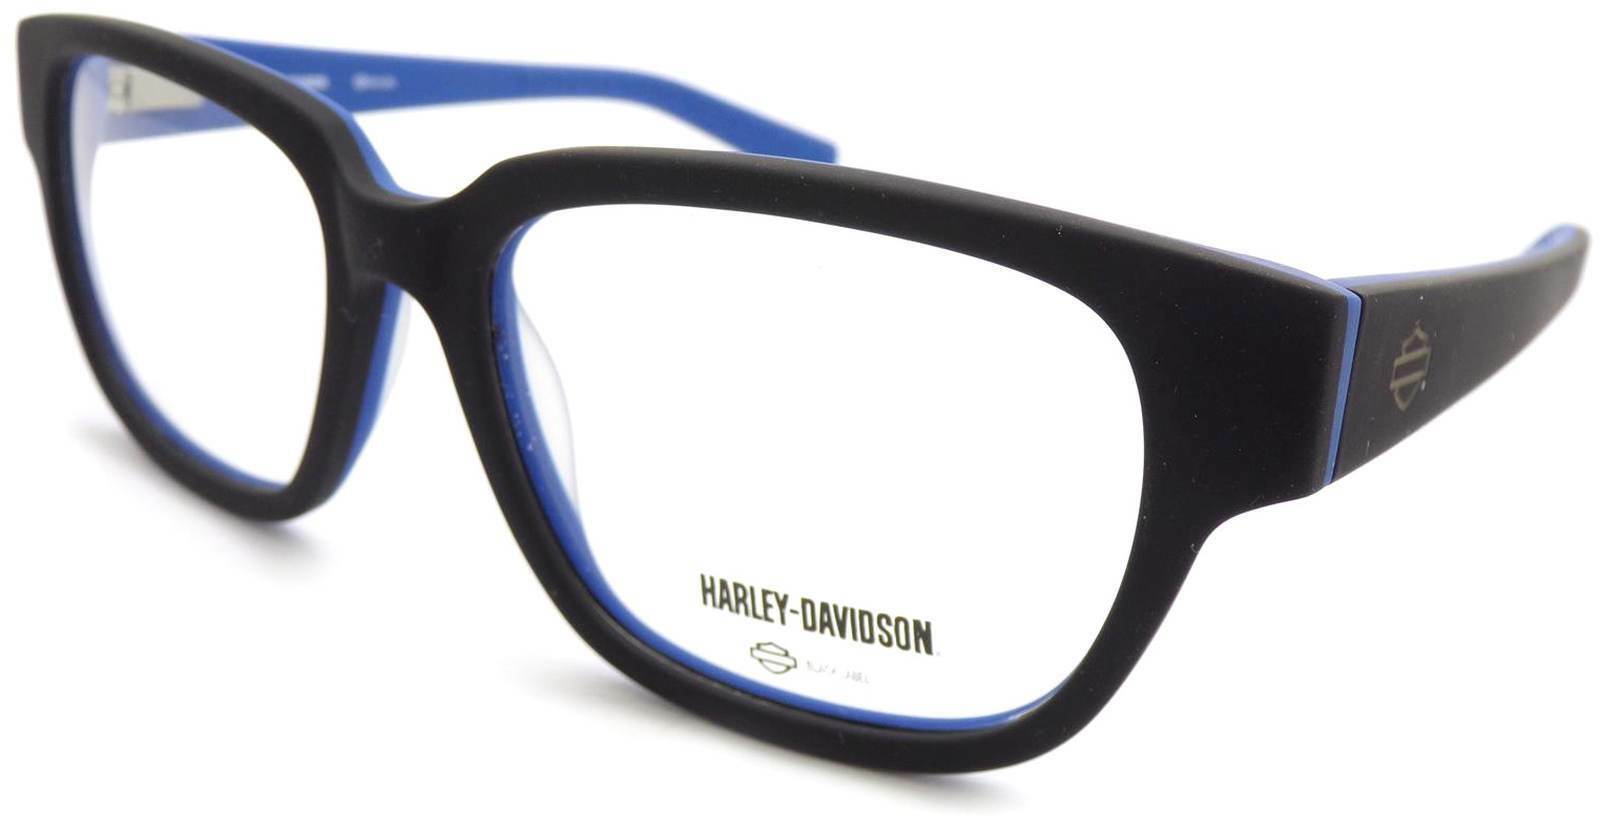 Why Harley Davidson Glasses are better than Eyewear Brands?